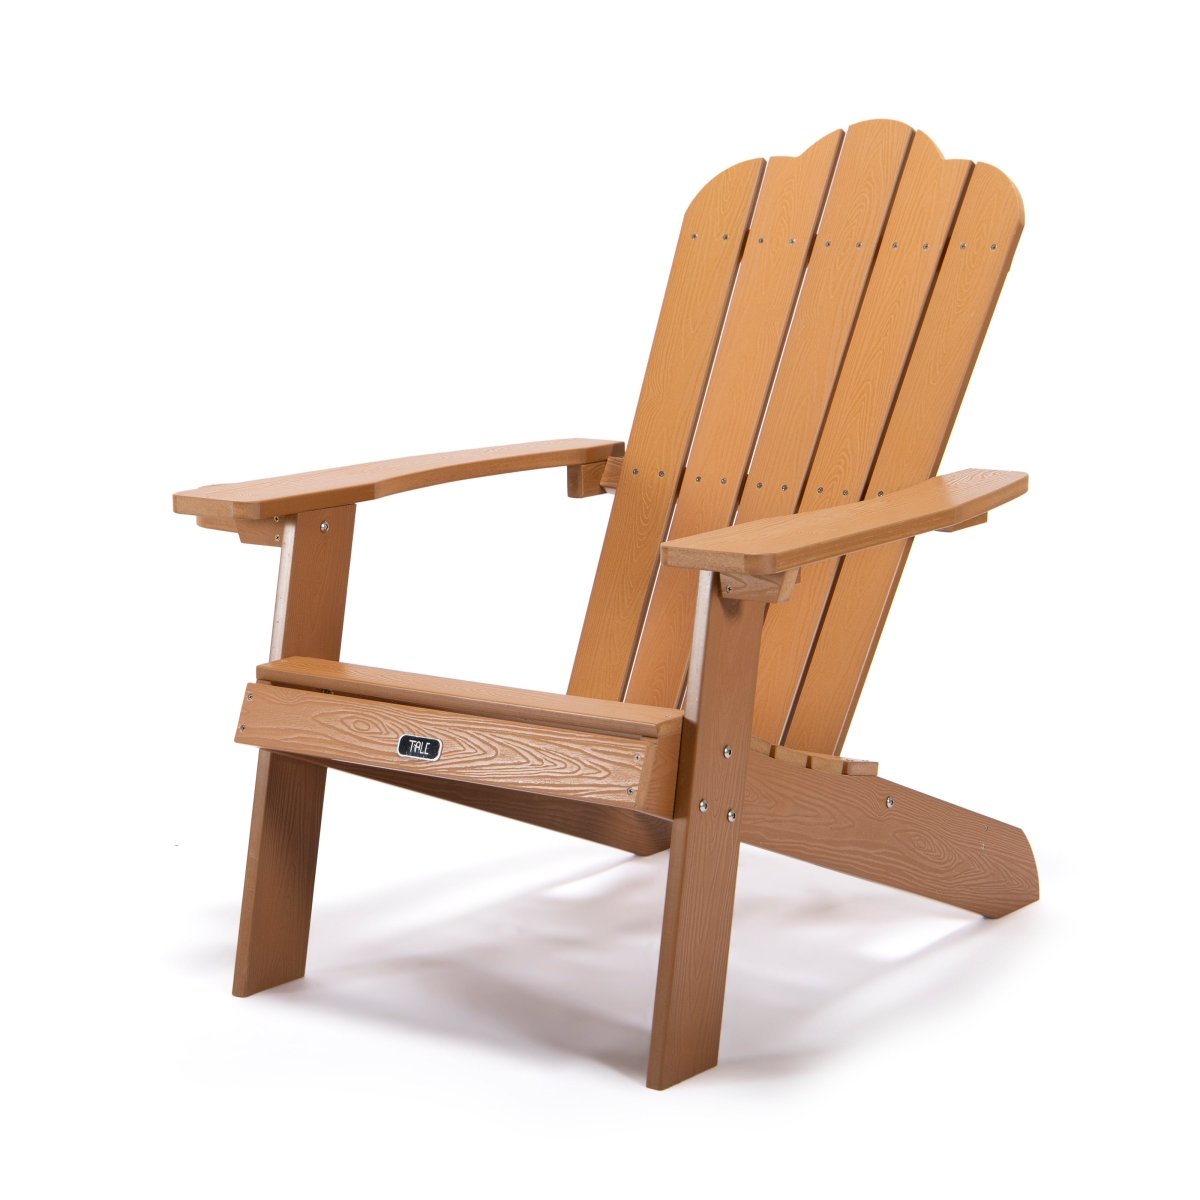 TrendyAffordables Adirondack Chair | Stylish, Durable Outdoor Seating - TrendyAffordables - 5